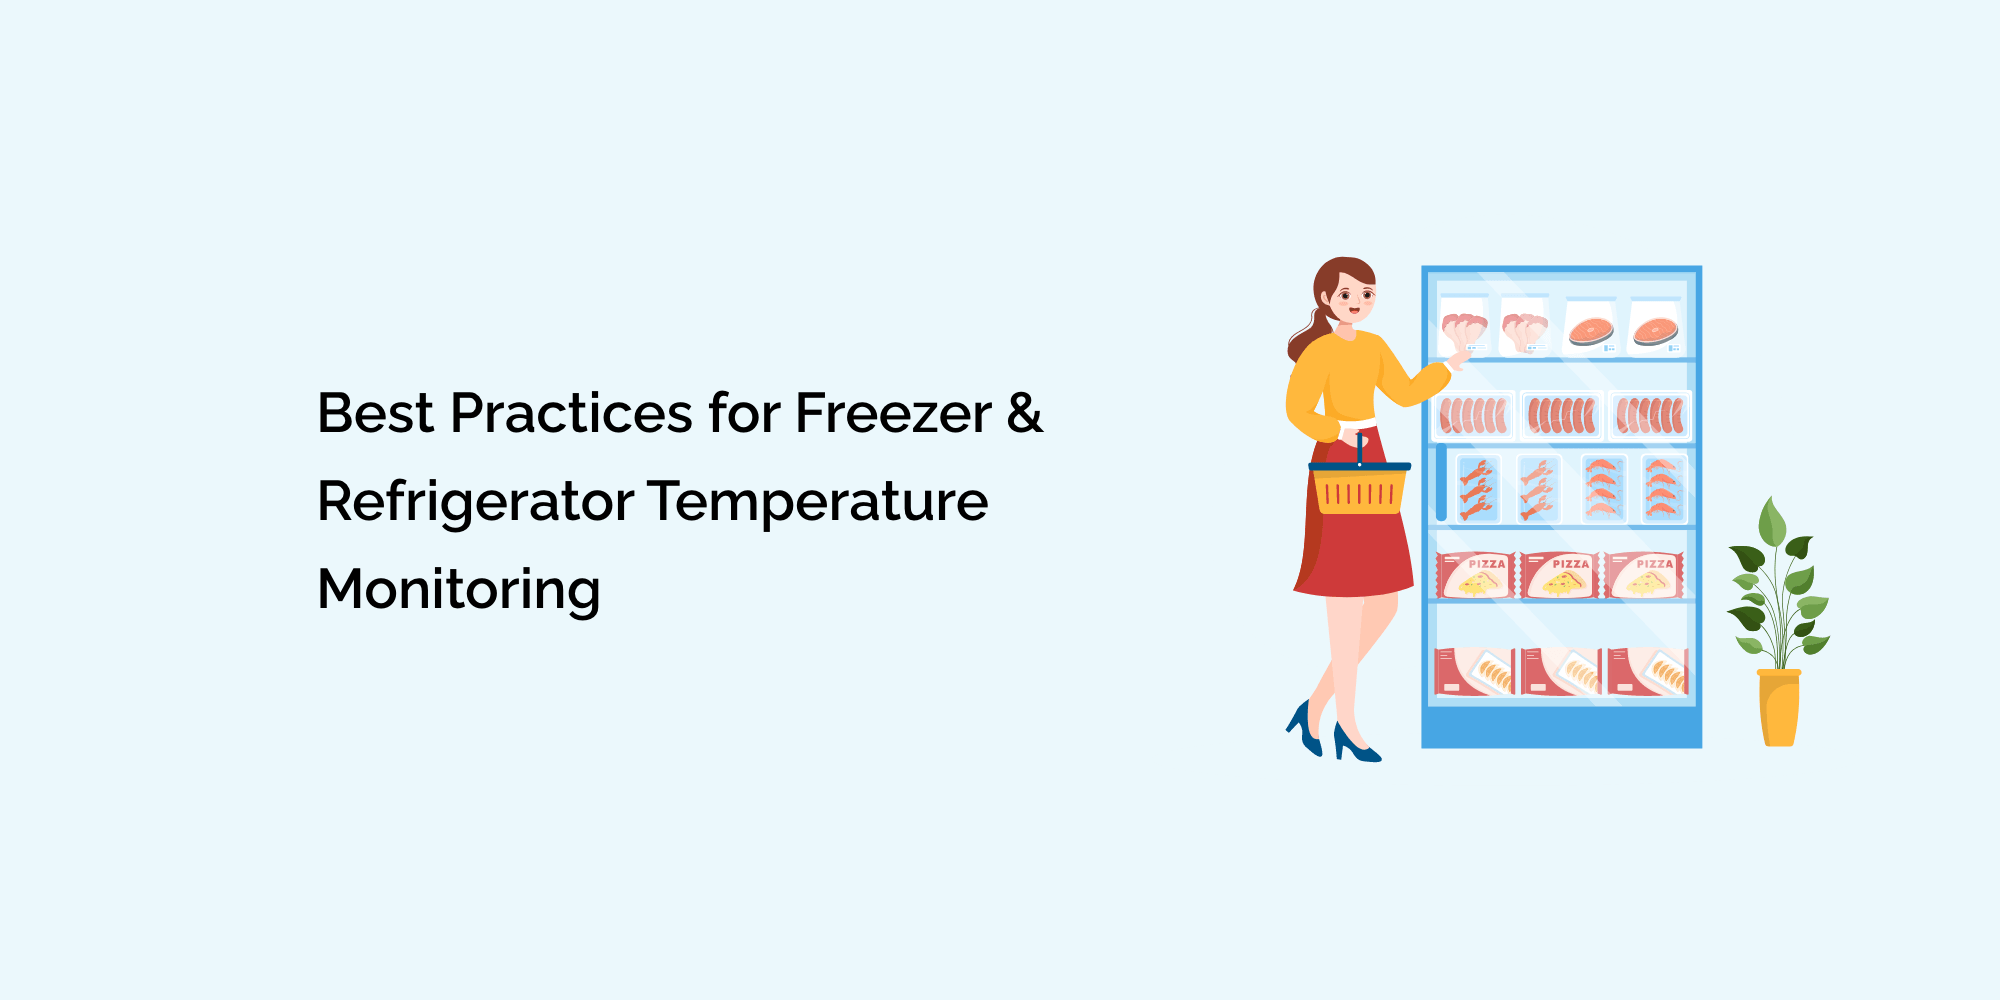 Best Practices for Freezer and Refrigerator Temperature Monitoring